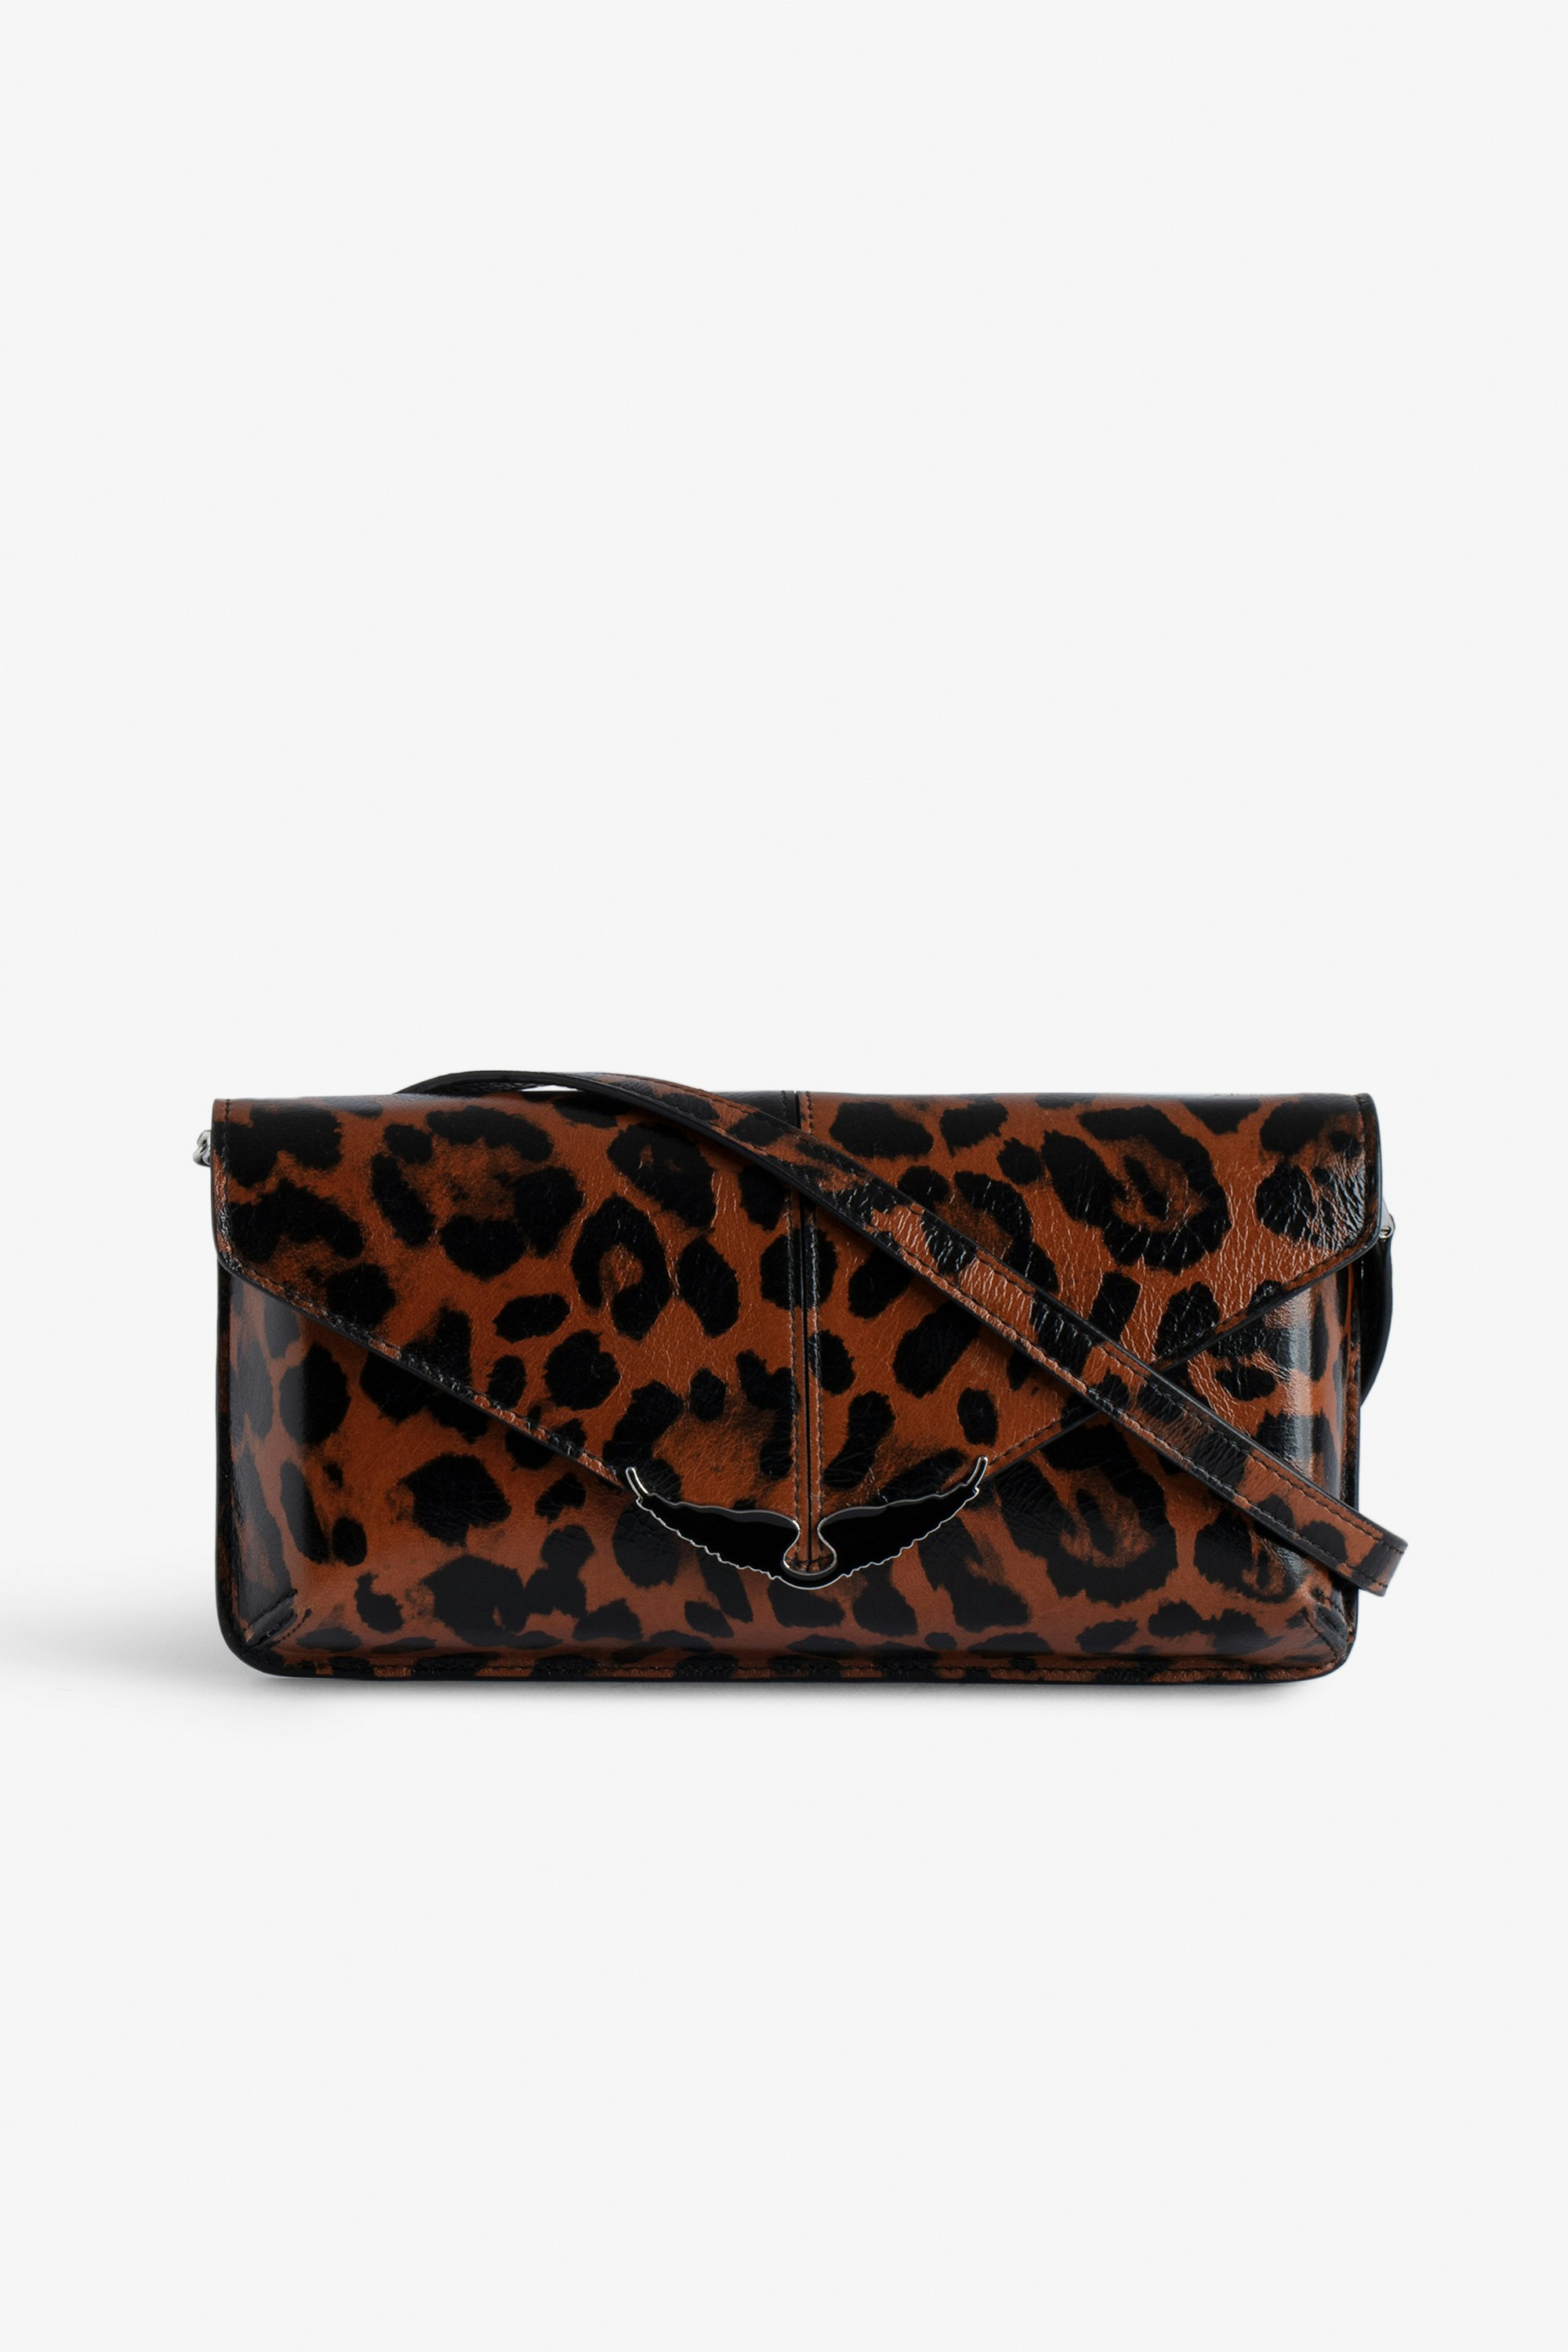 Borderline Leopard Clutch Women’s brown patent leather leopard-print clutch with shoulder strap with wings charm.